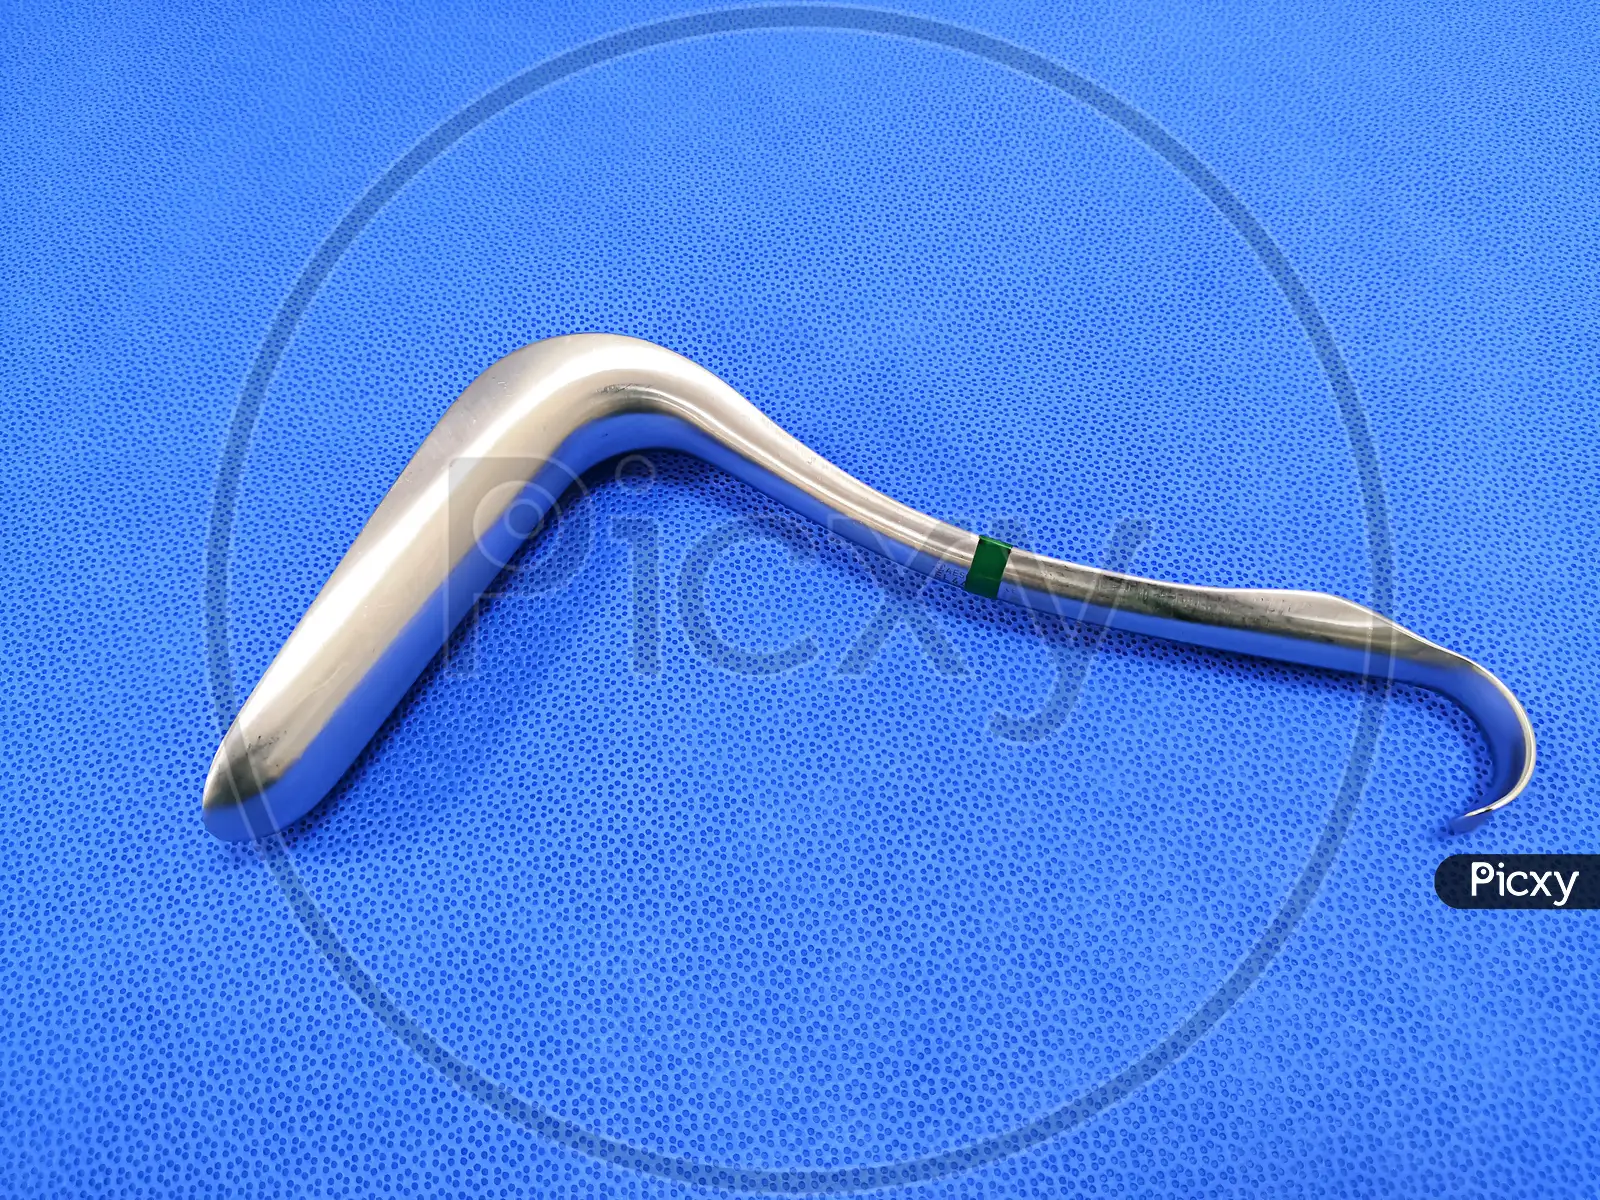 Gynaecology Veginal Speculum Cusco, Stainless Steel at Rs 3500